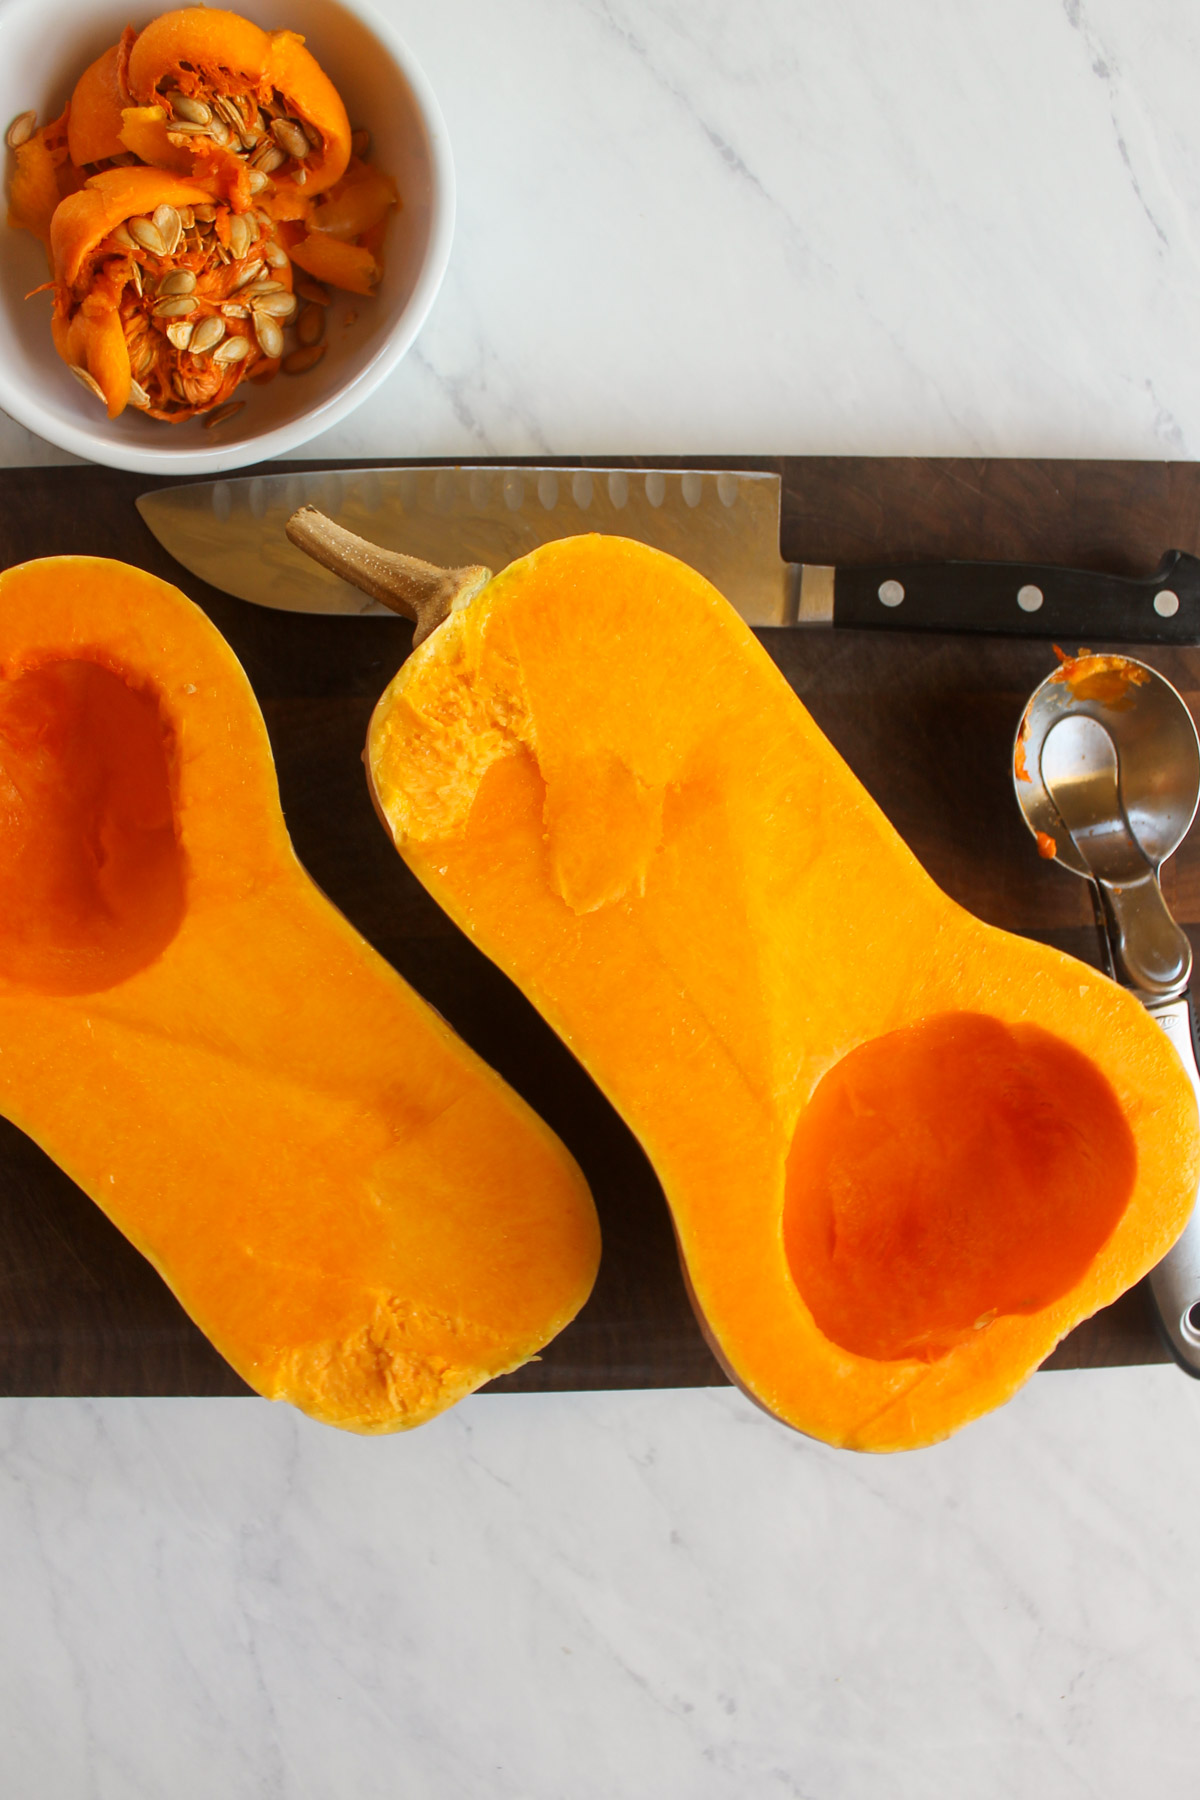 A butternut squash cut open in half with the seeds scooped out.